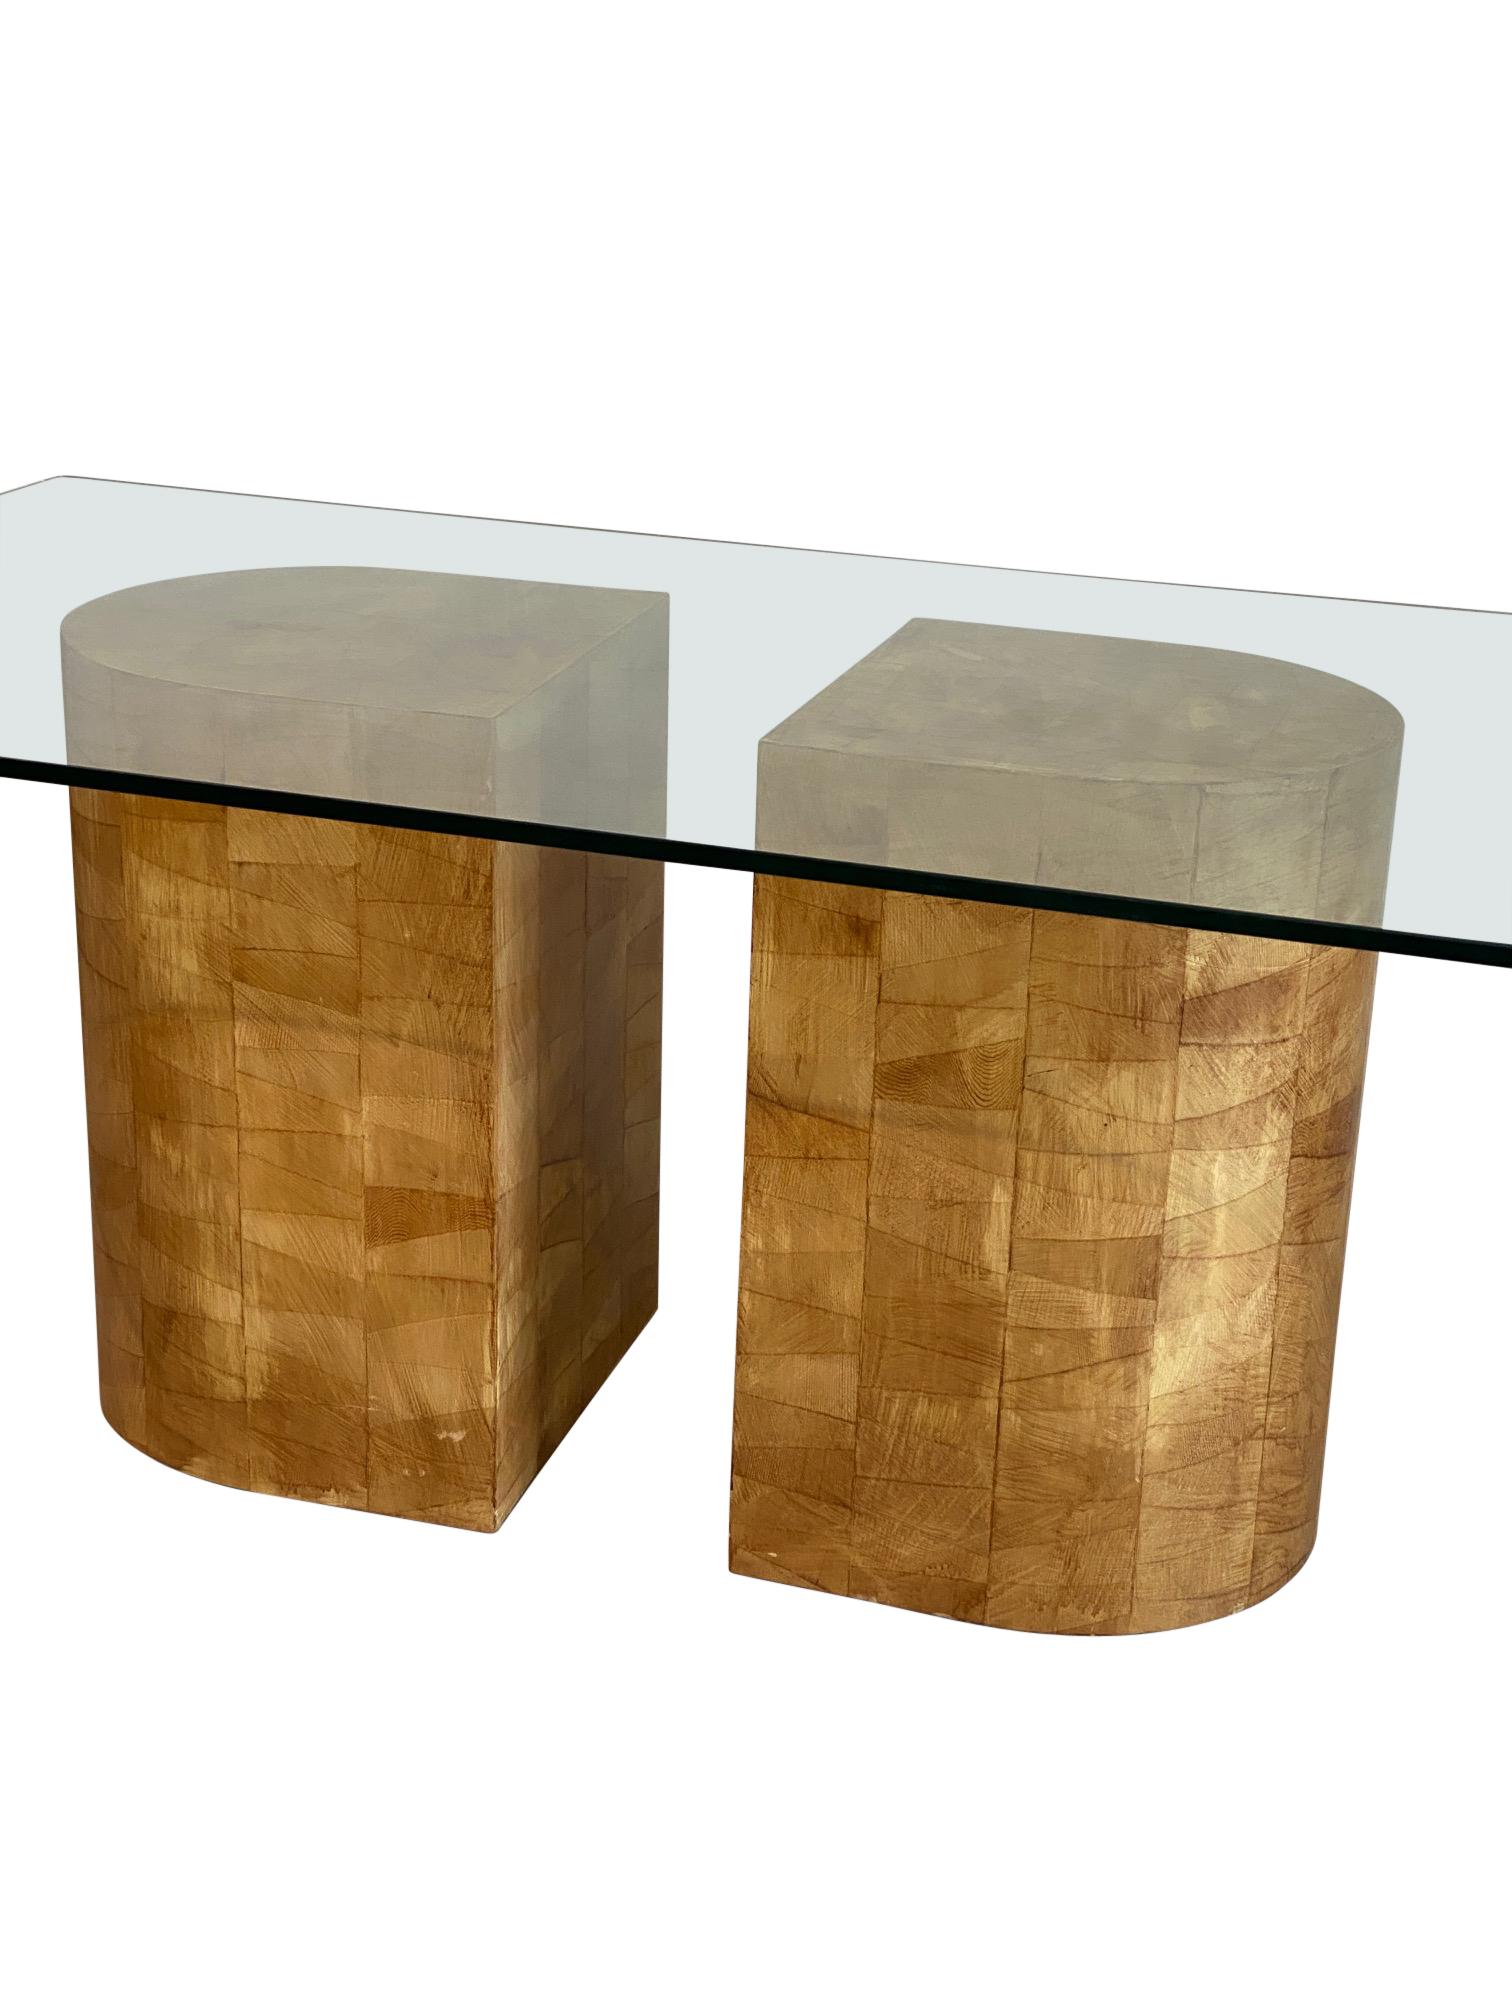 20th Century Two-Piece Solid Wooden Blocks Dining Table For Sale